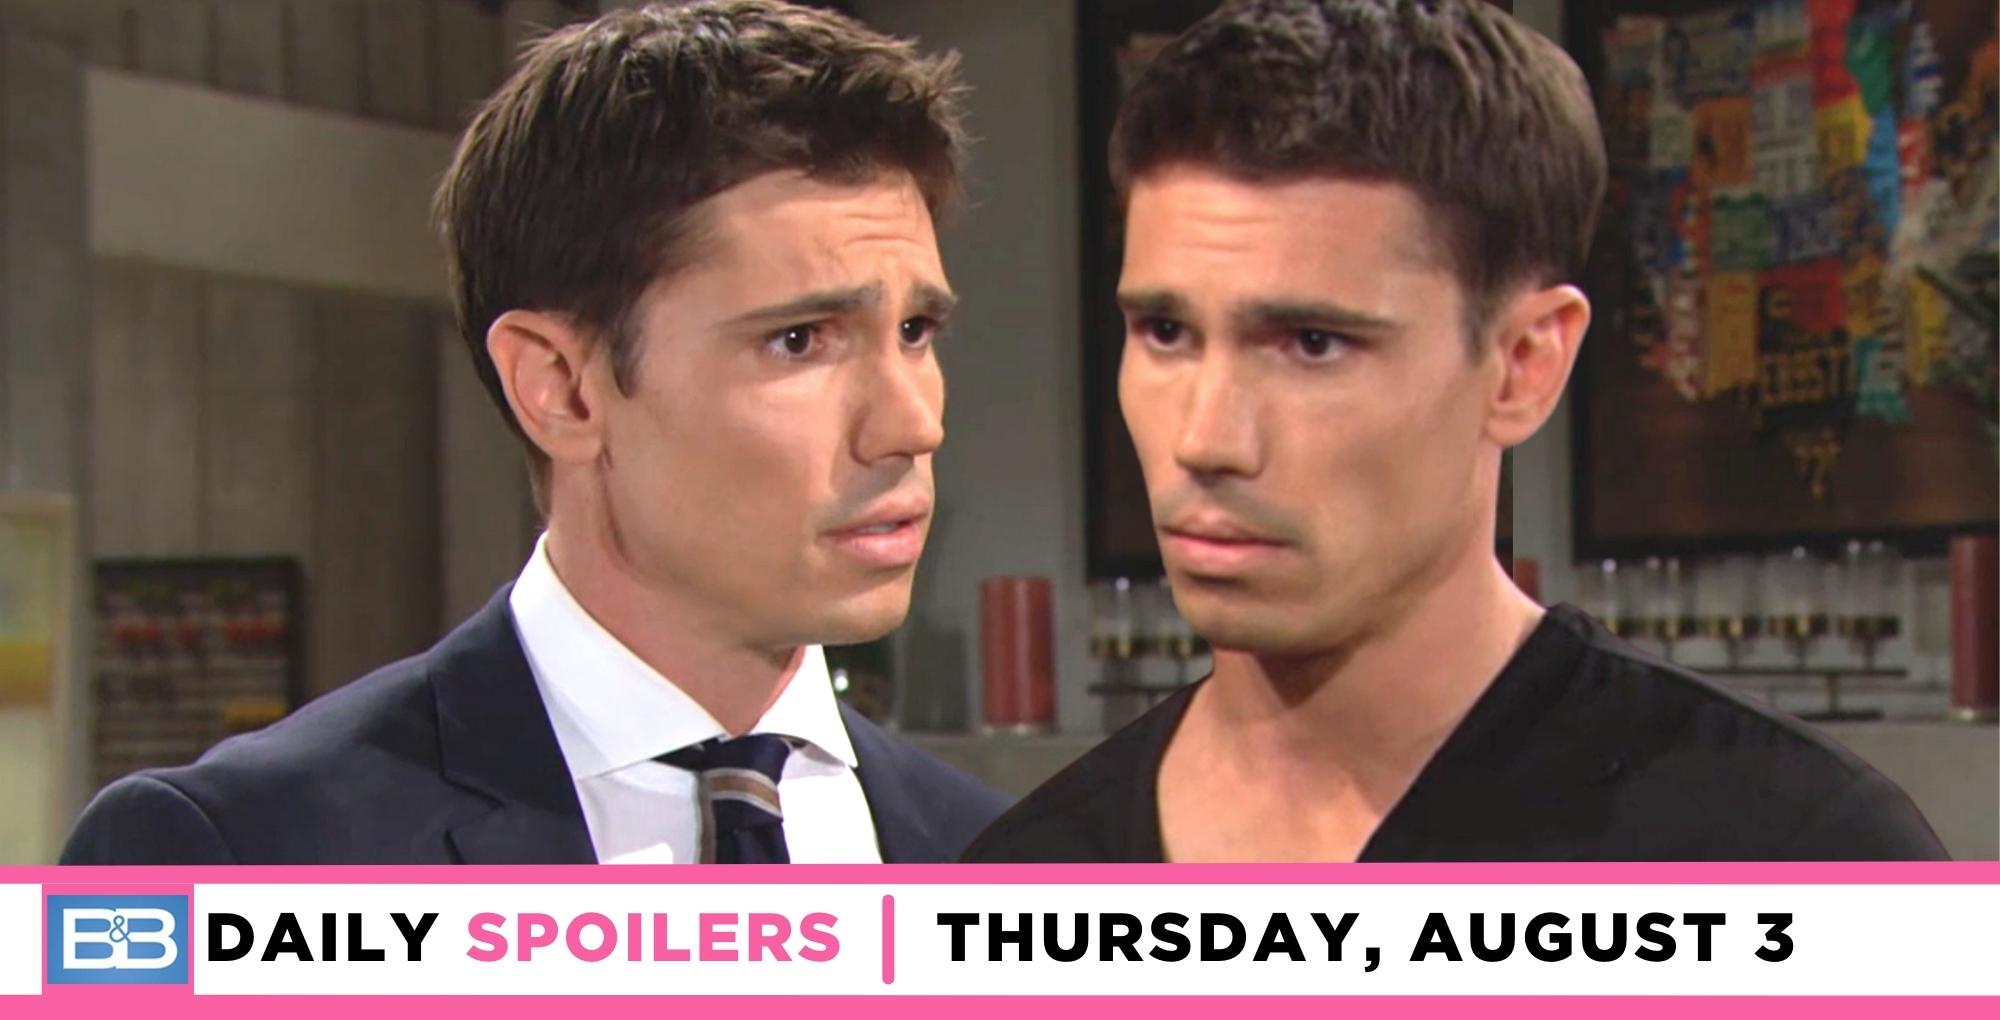 the bold and the beautiful spoilers for august 3, 2023, have two images of finn.